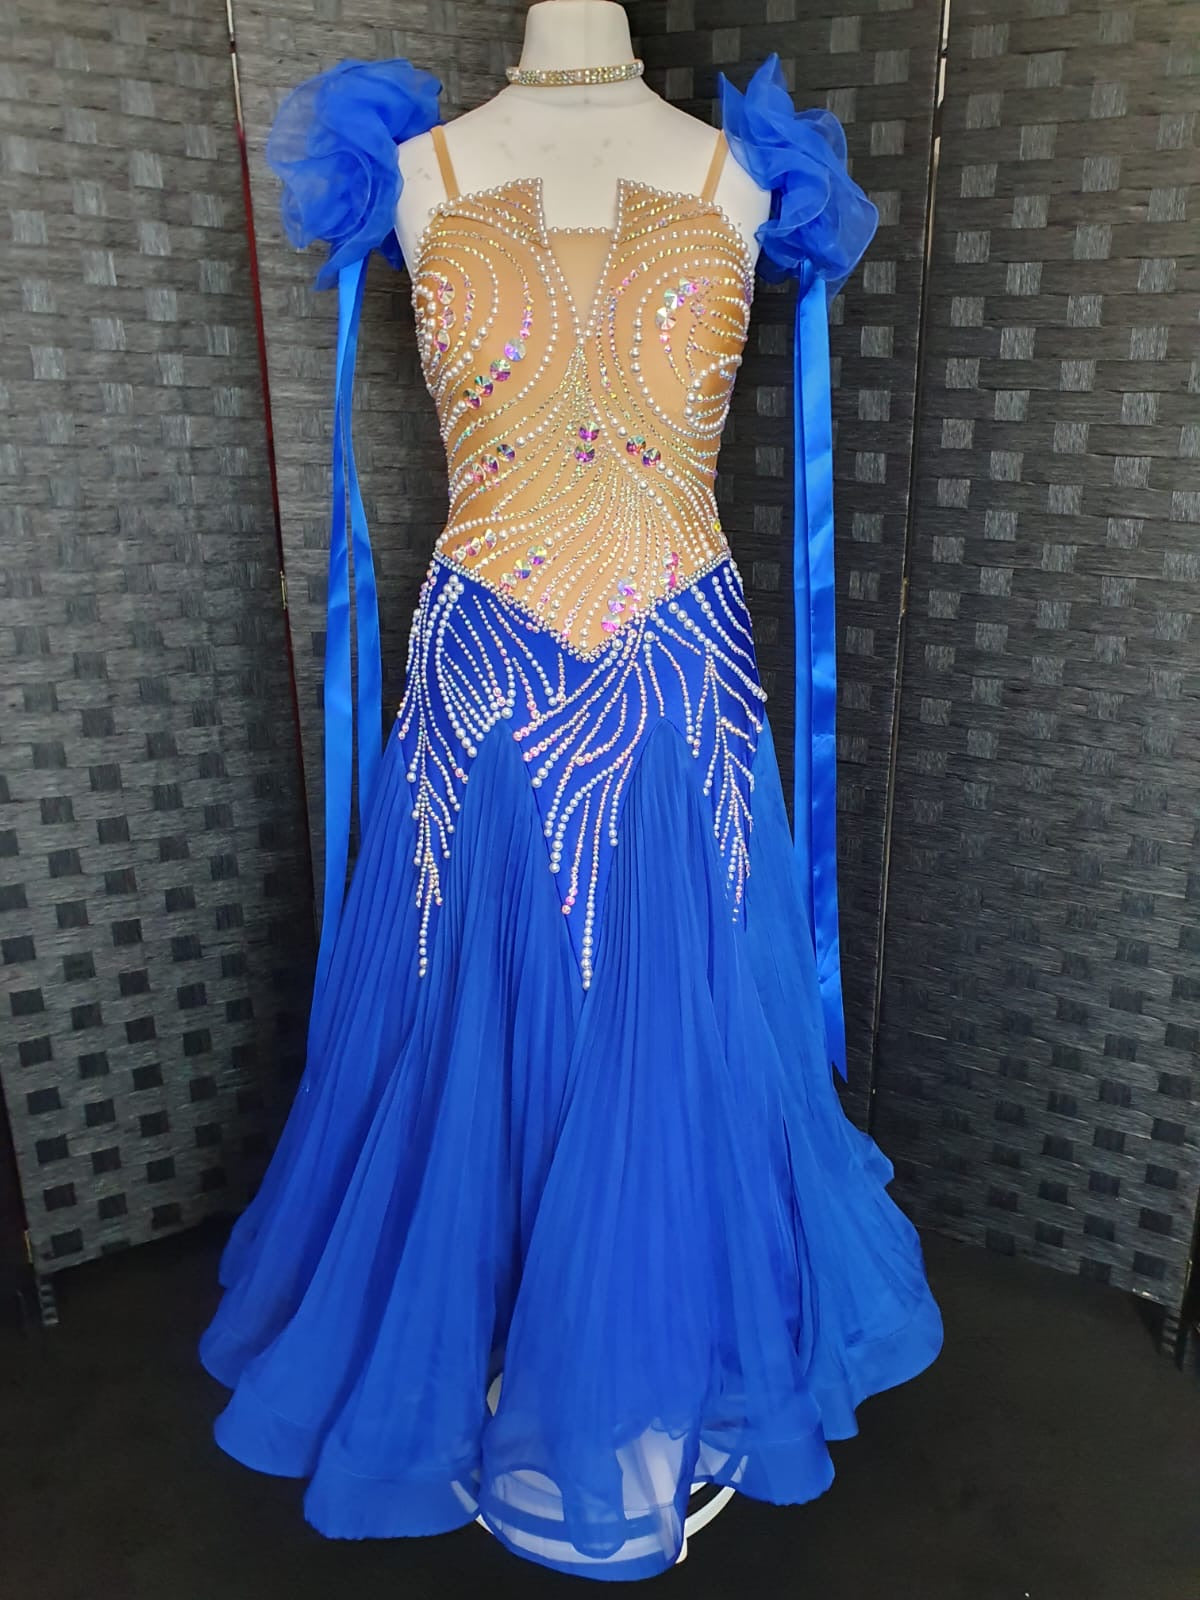 243 Royal Blue & Flesh Ballroom Dress. Decorated in pearls & AB stones. Organza ruffle floats with hanging ribbons.